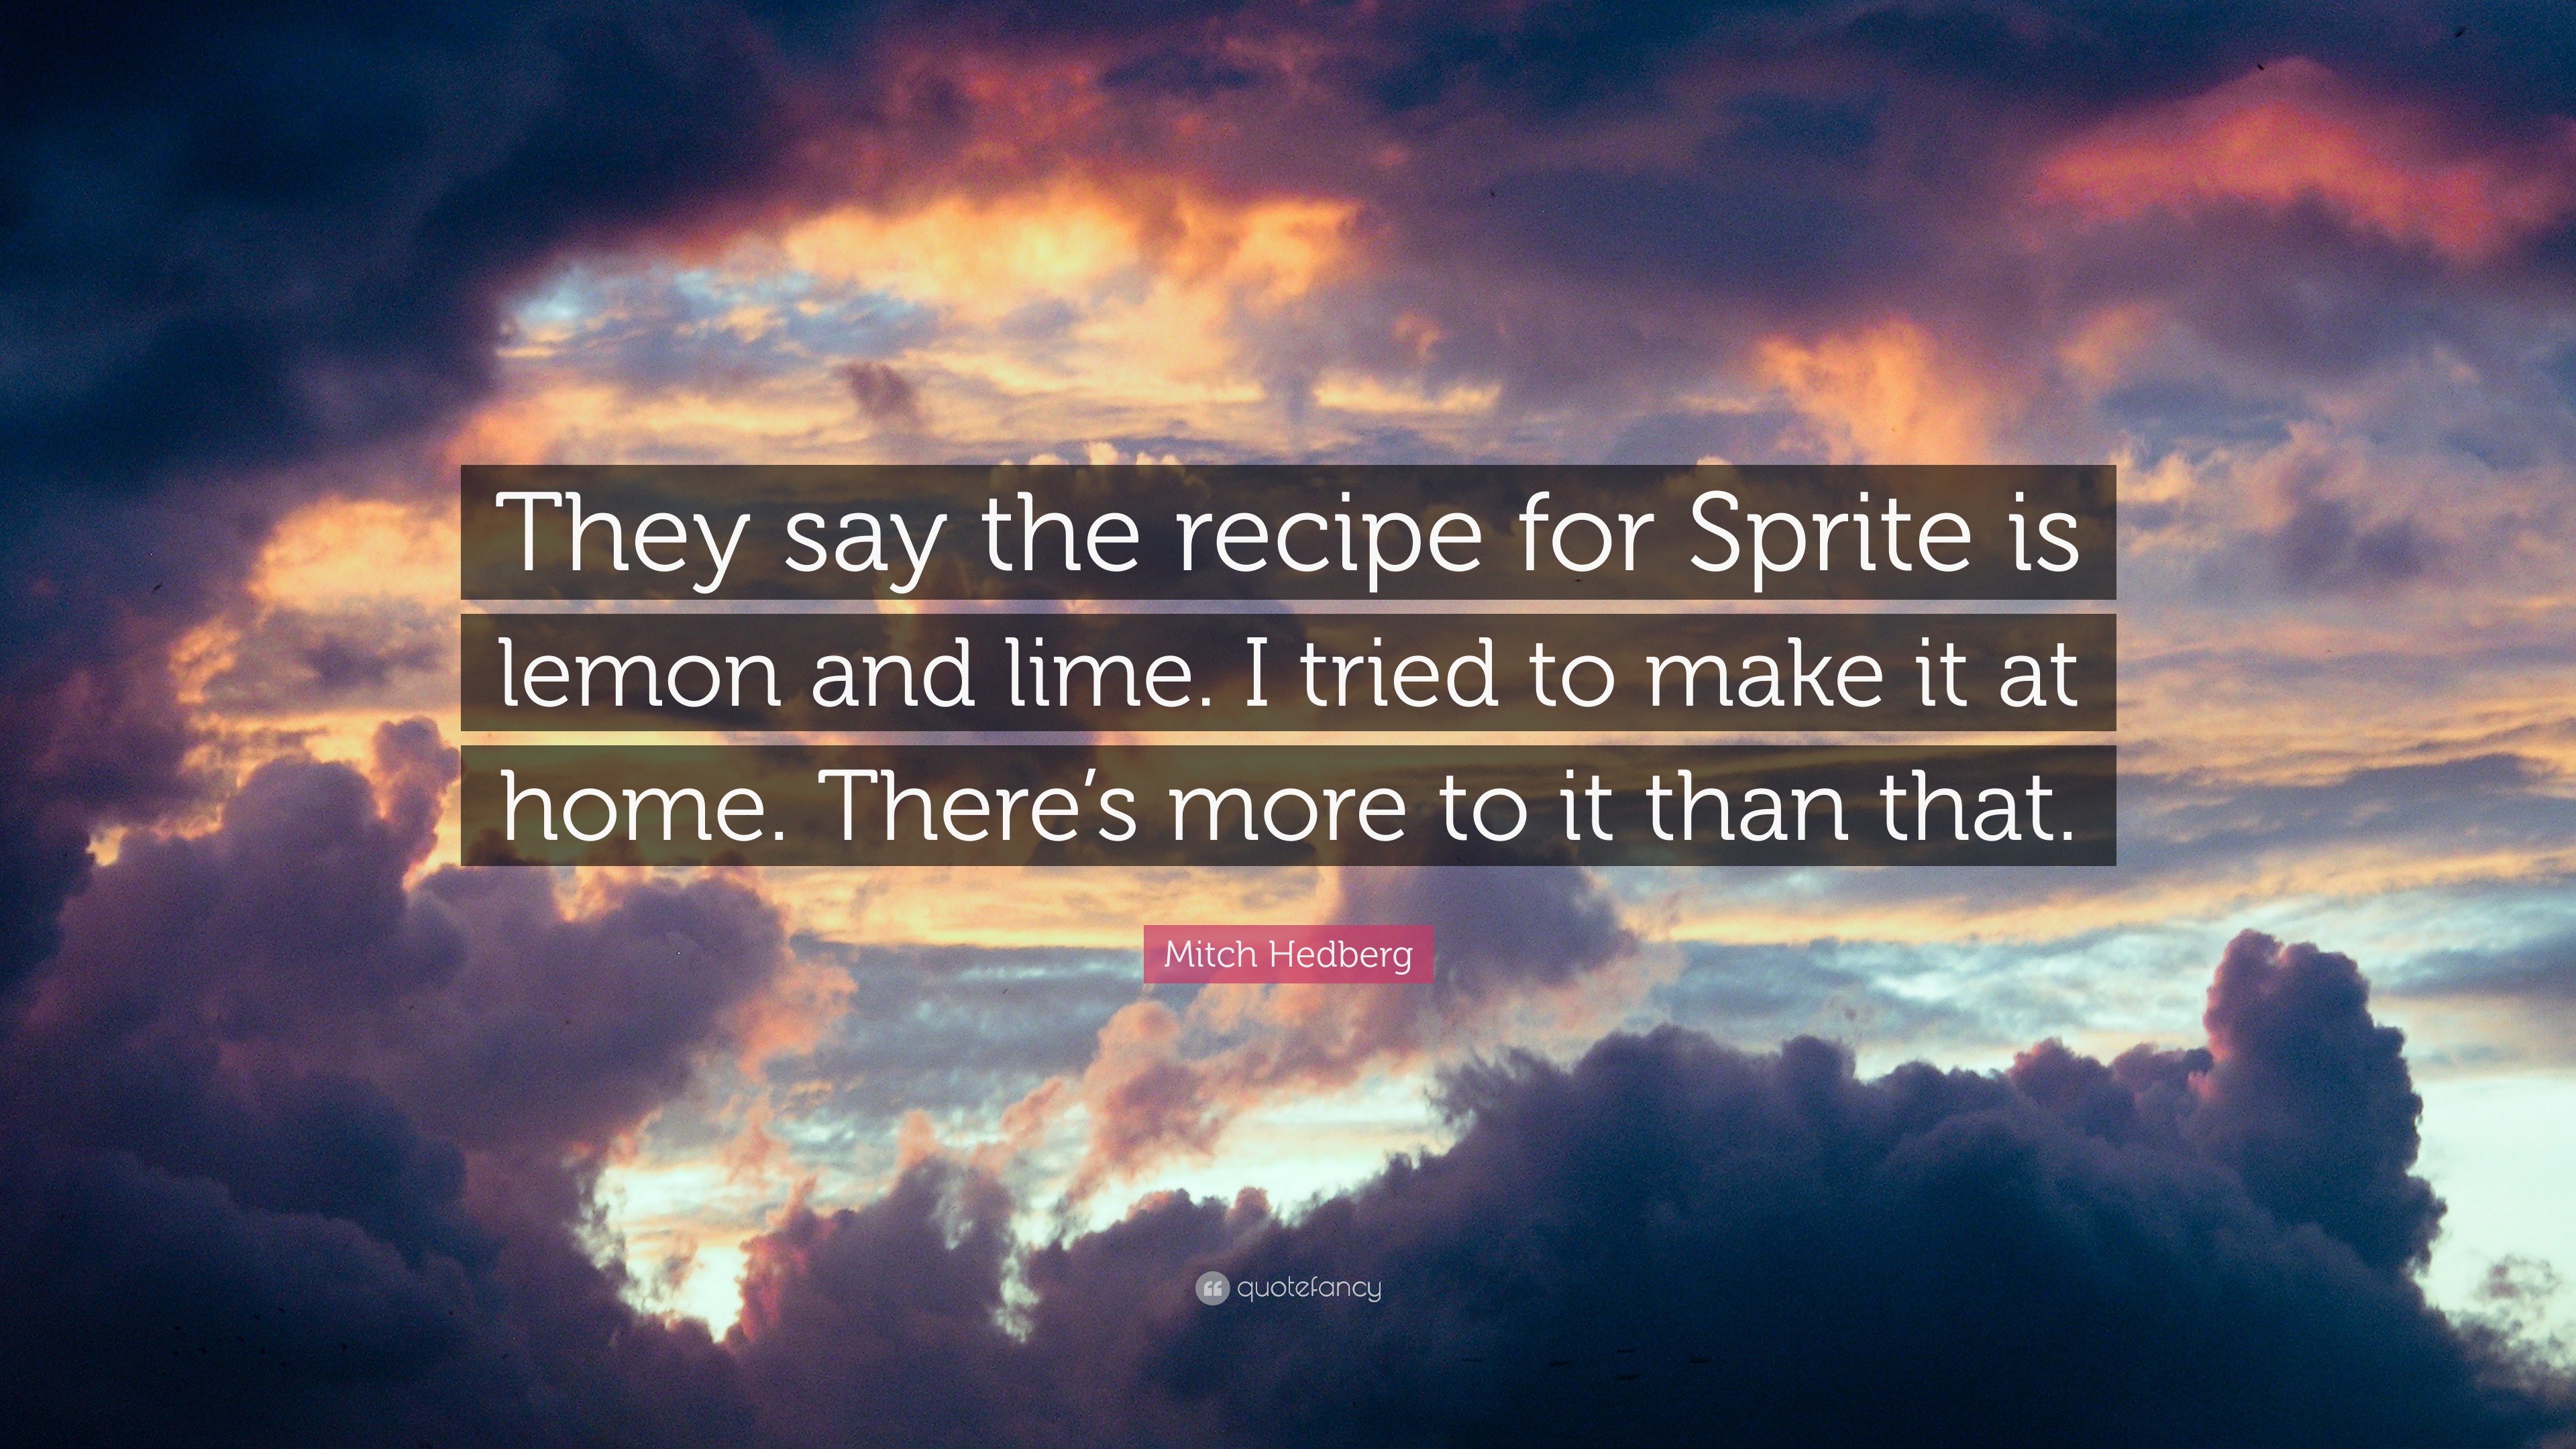 Mitch Hedberg Quote: "They say the recipe for Sprite is ...